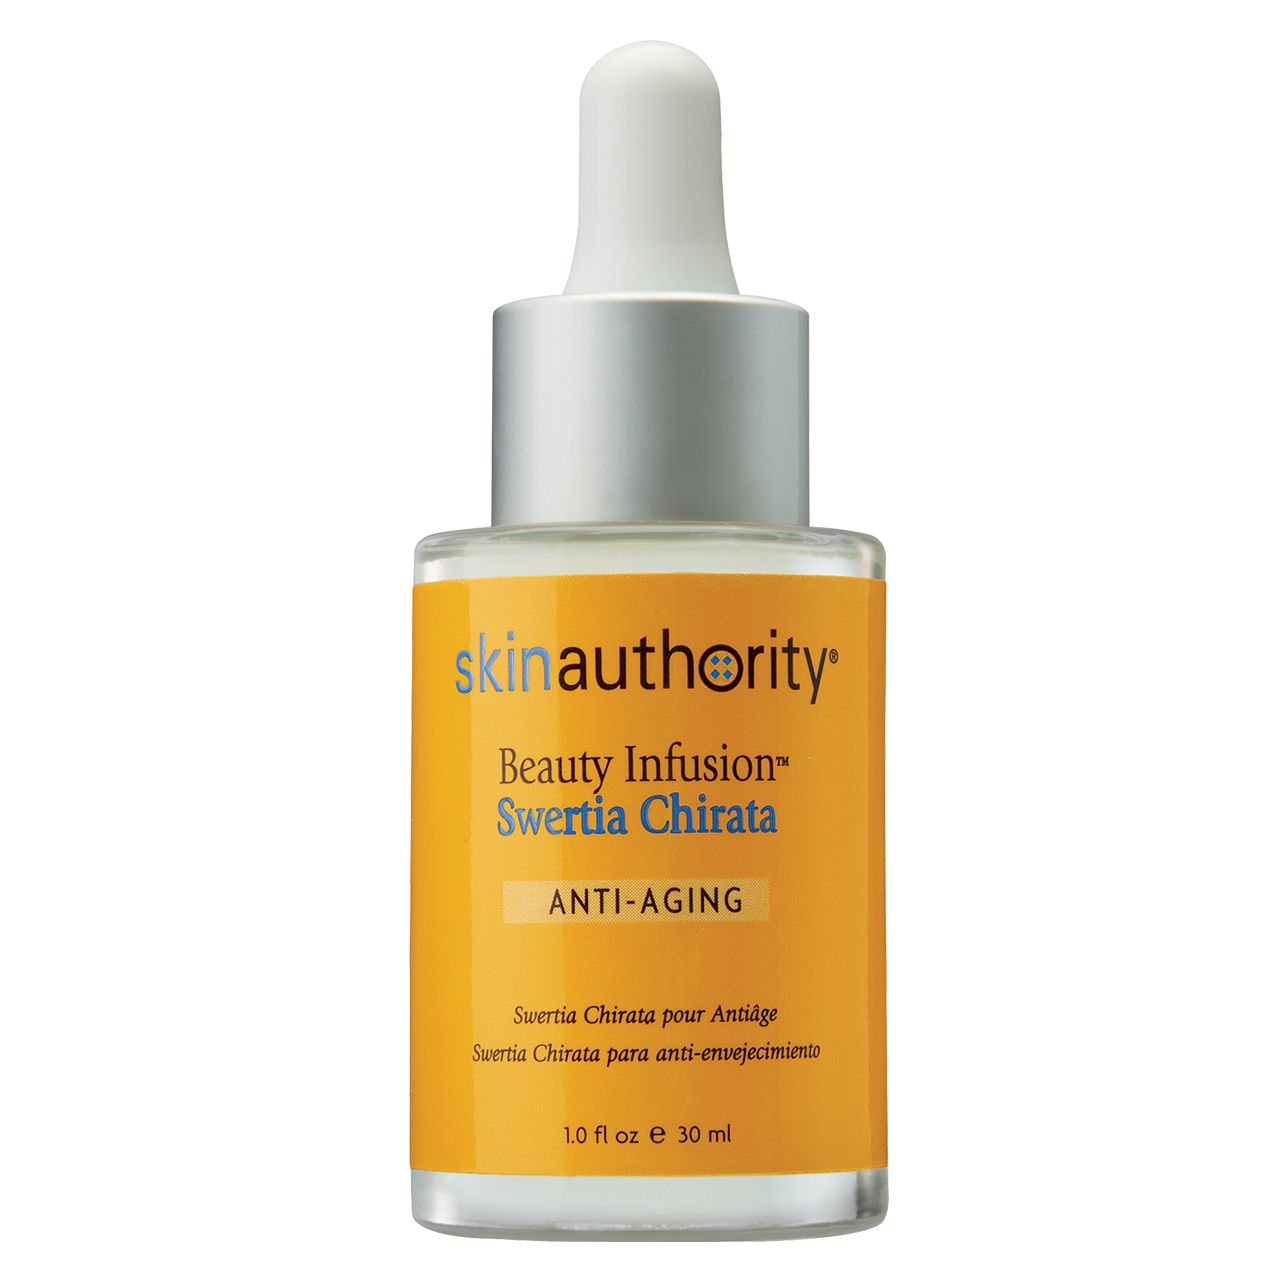 Beauty Infusion Swertia Chirata for Anti-Aging | Skin Authority